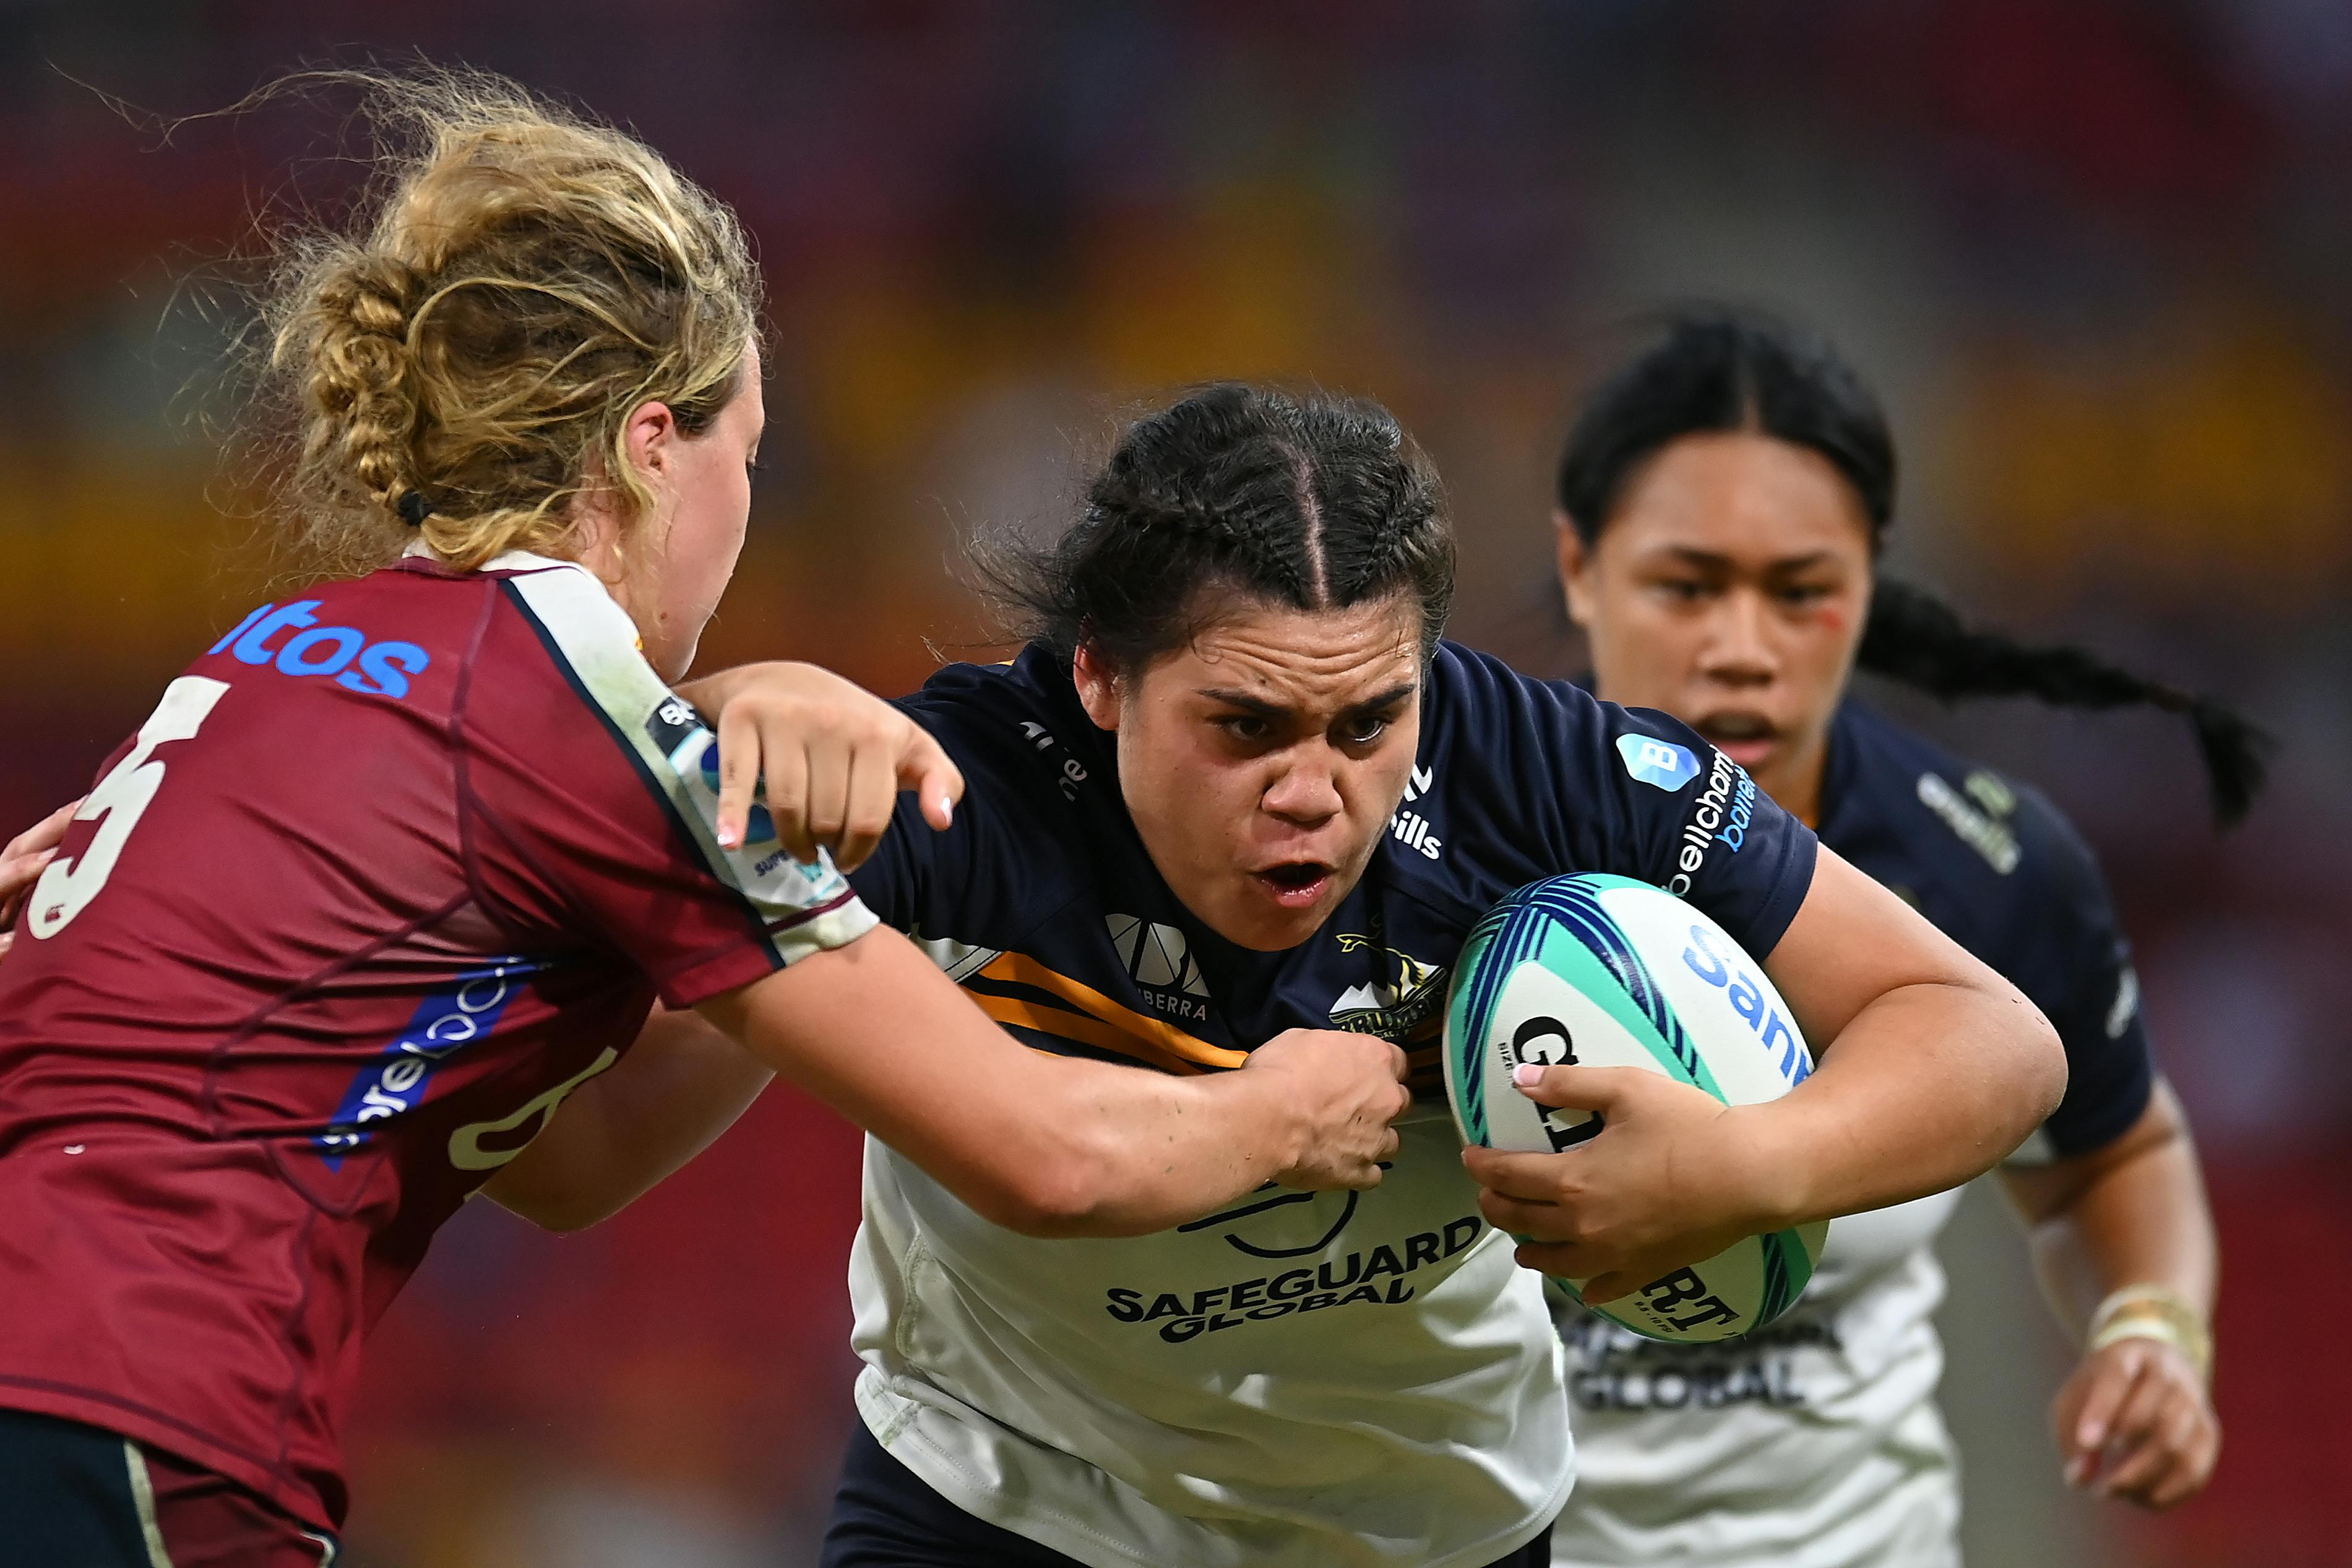 Allana Sikimeti during her Super Rugby Women's match against the Queensland Reds.